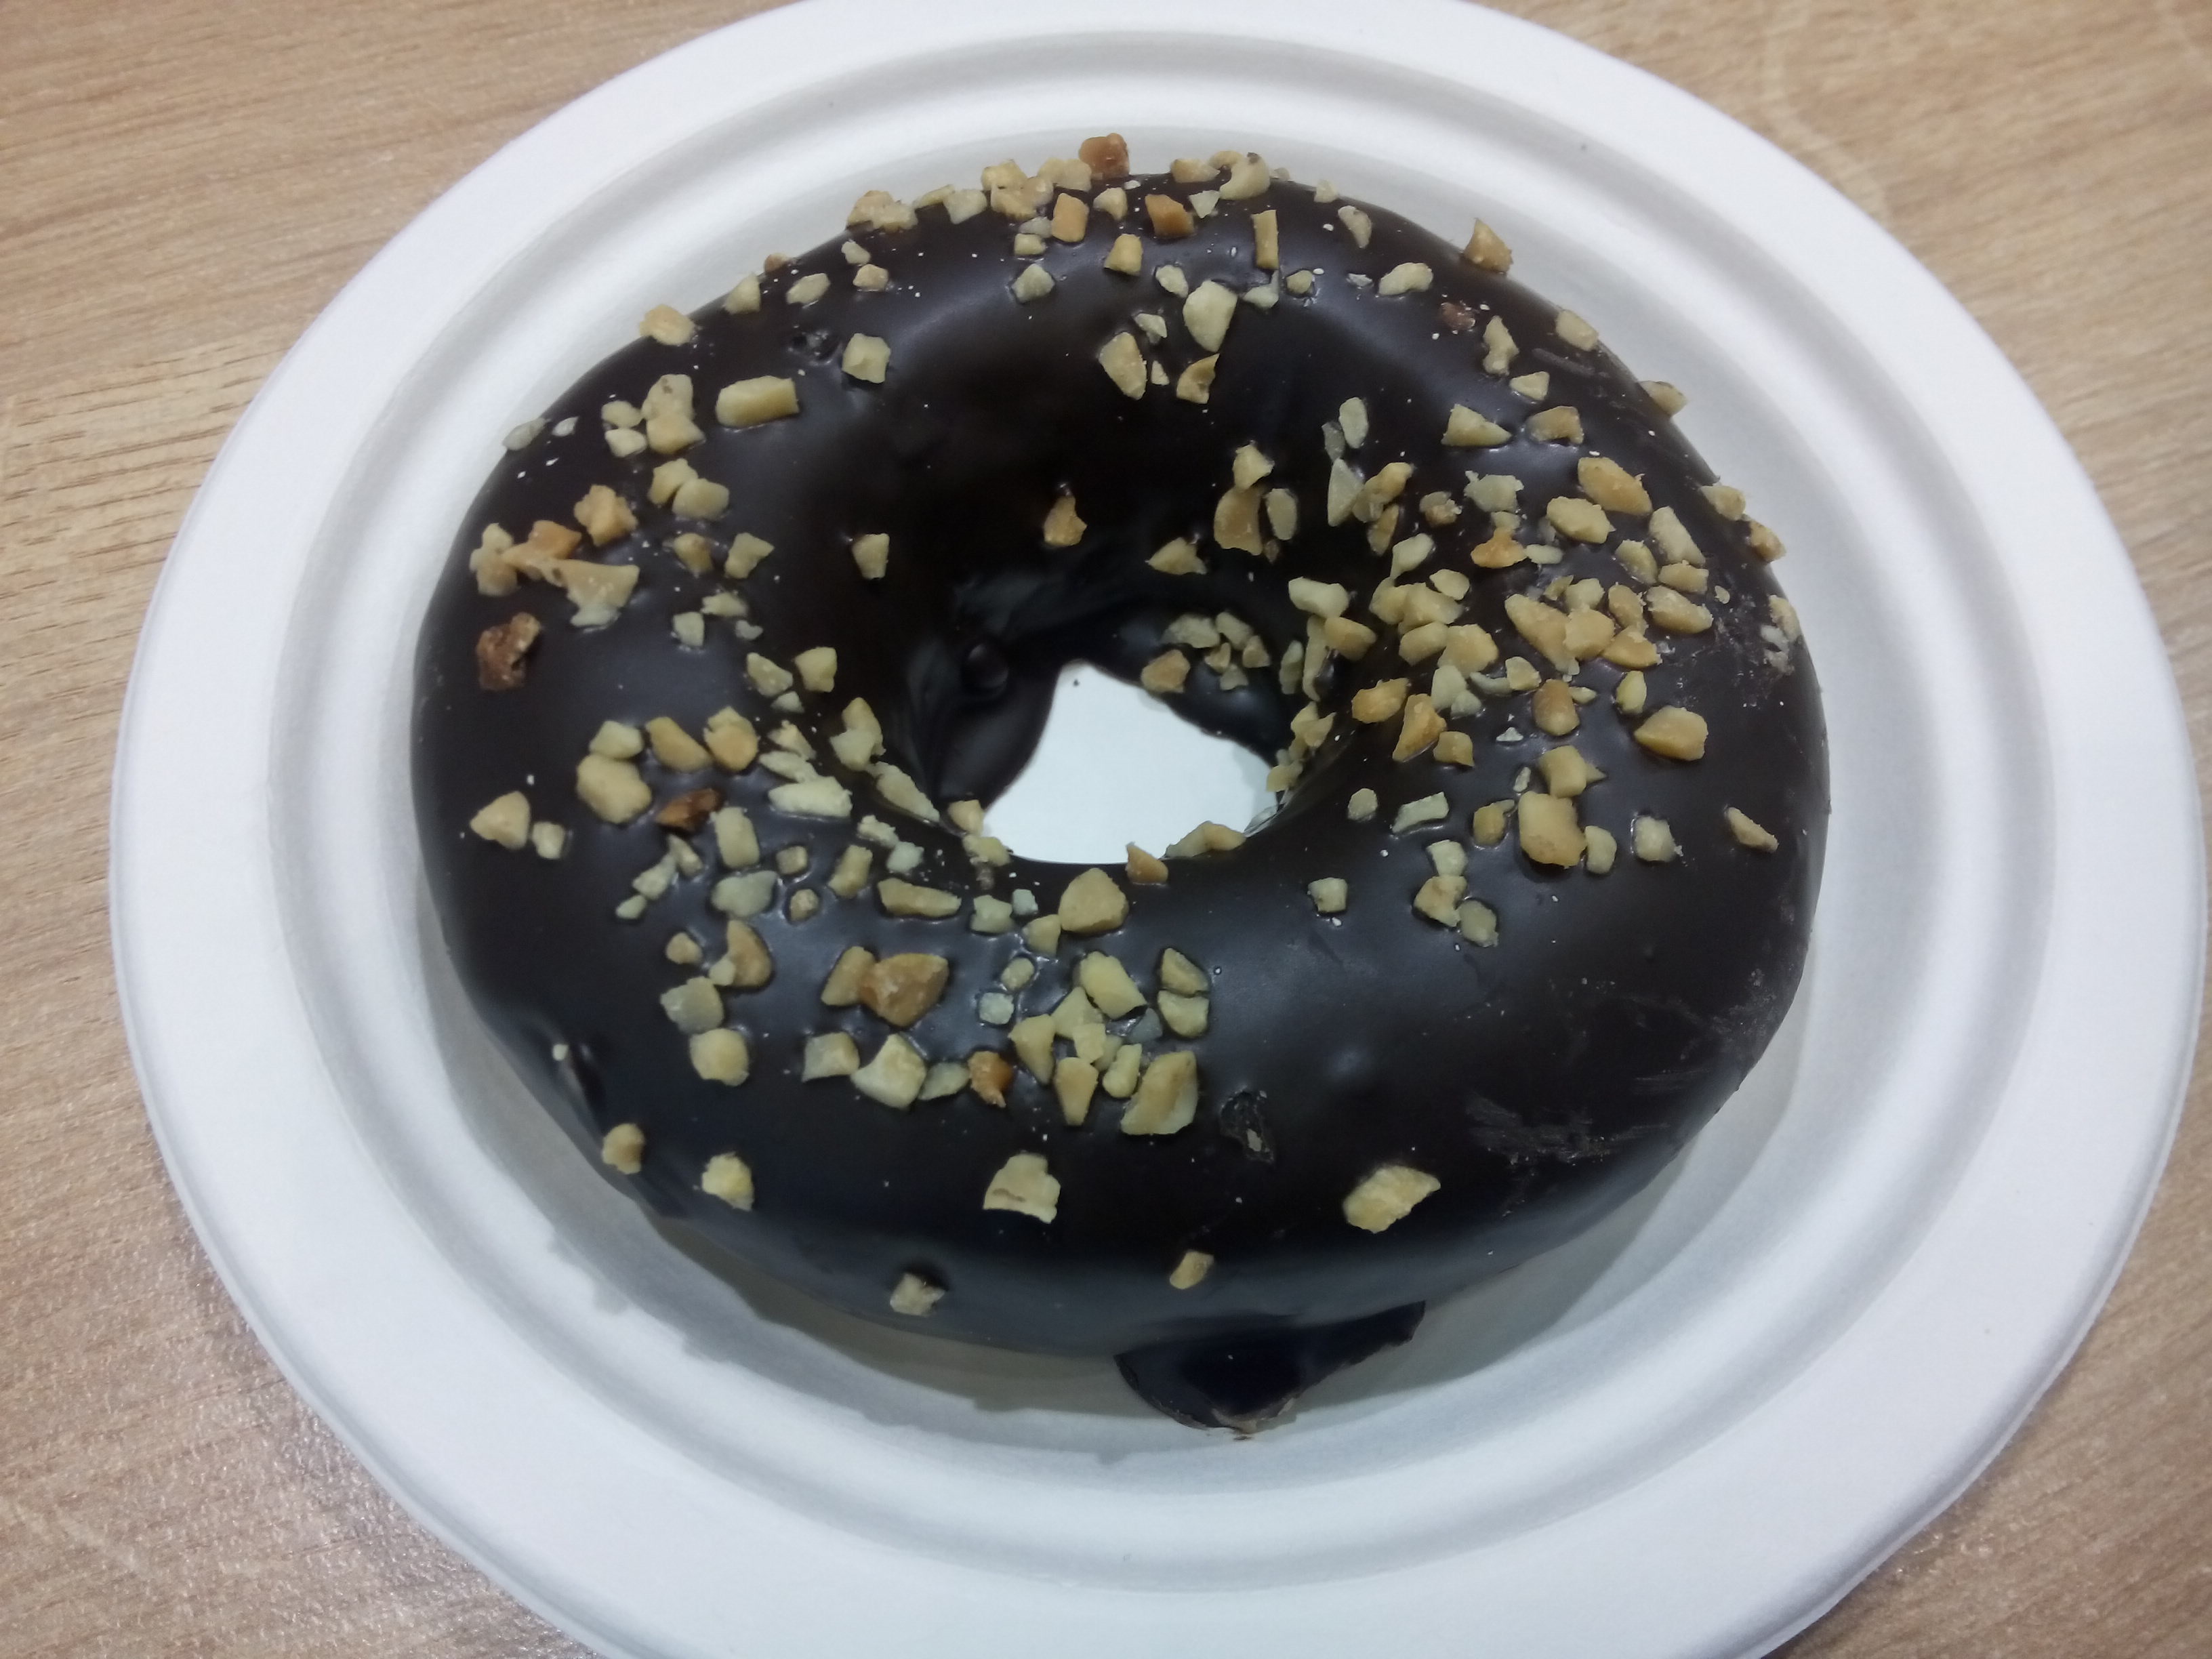 A white paper plate with a choclate and nut covered donut with a hole